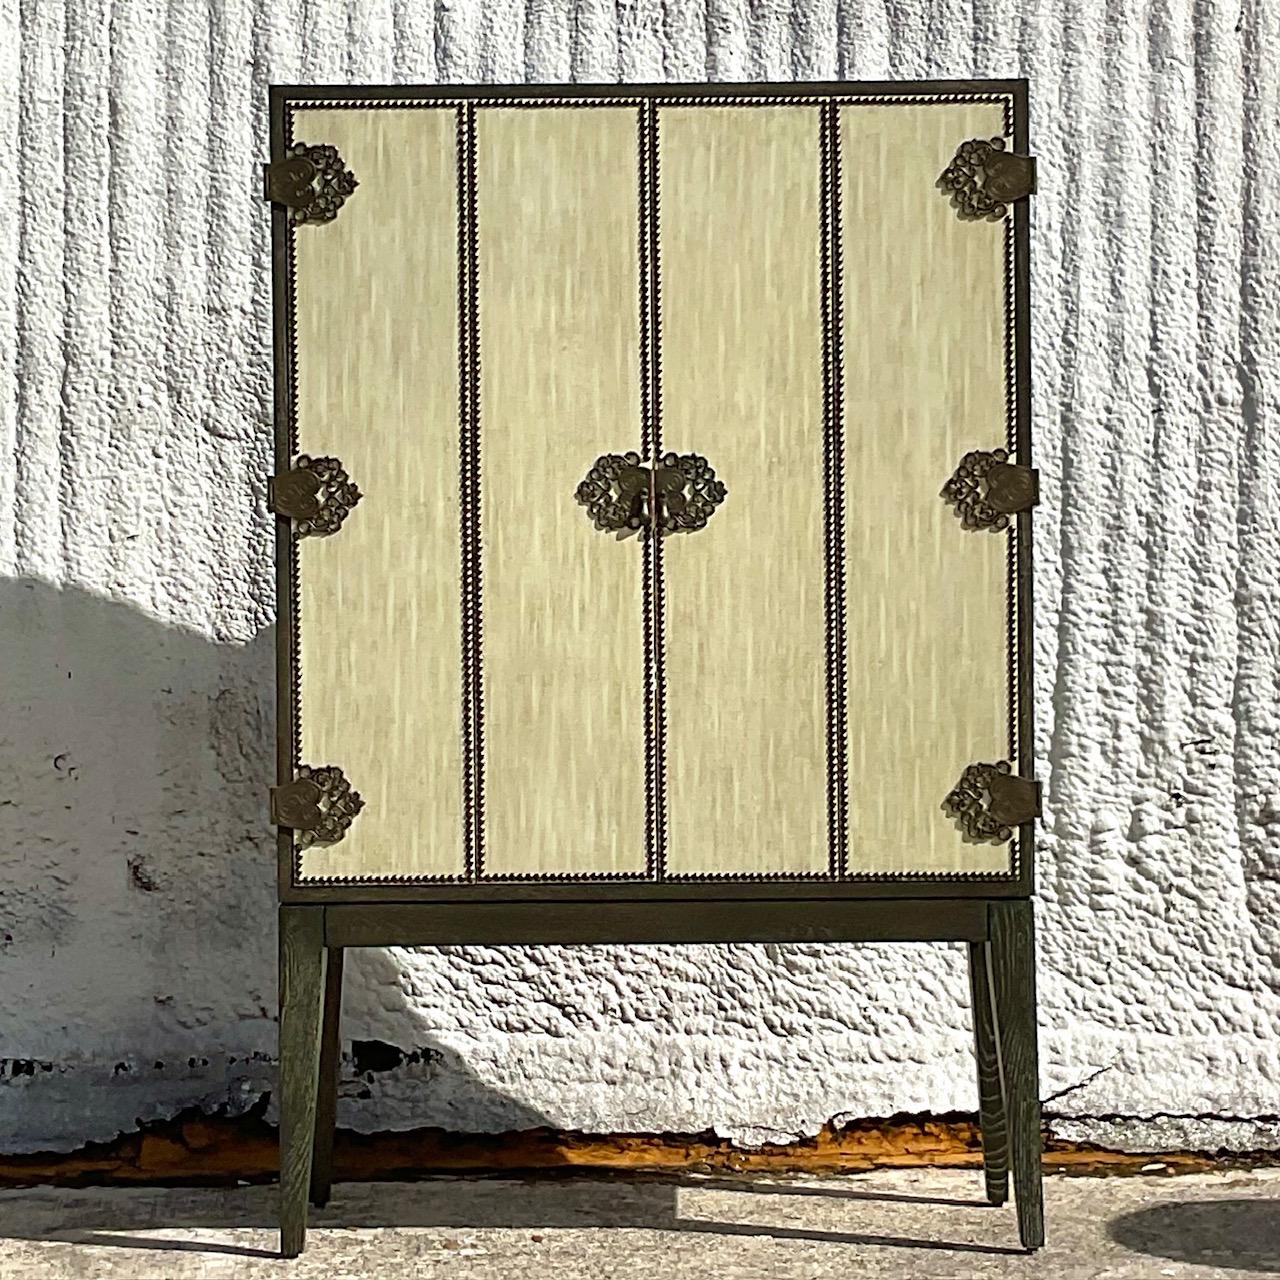 A spectacular vintage Boho dry bar cabinet. The iconic Arteriors 60 inch Chelsey cabinet. Beautiful wrapped linen doors with nailhead trim and engraved hardware. Chic mirrored interior with glass helped. A cerused charcoal finish. Acquired from a